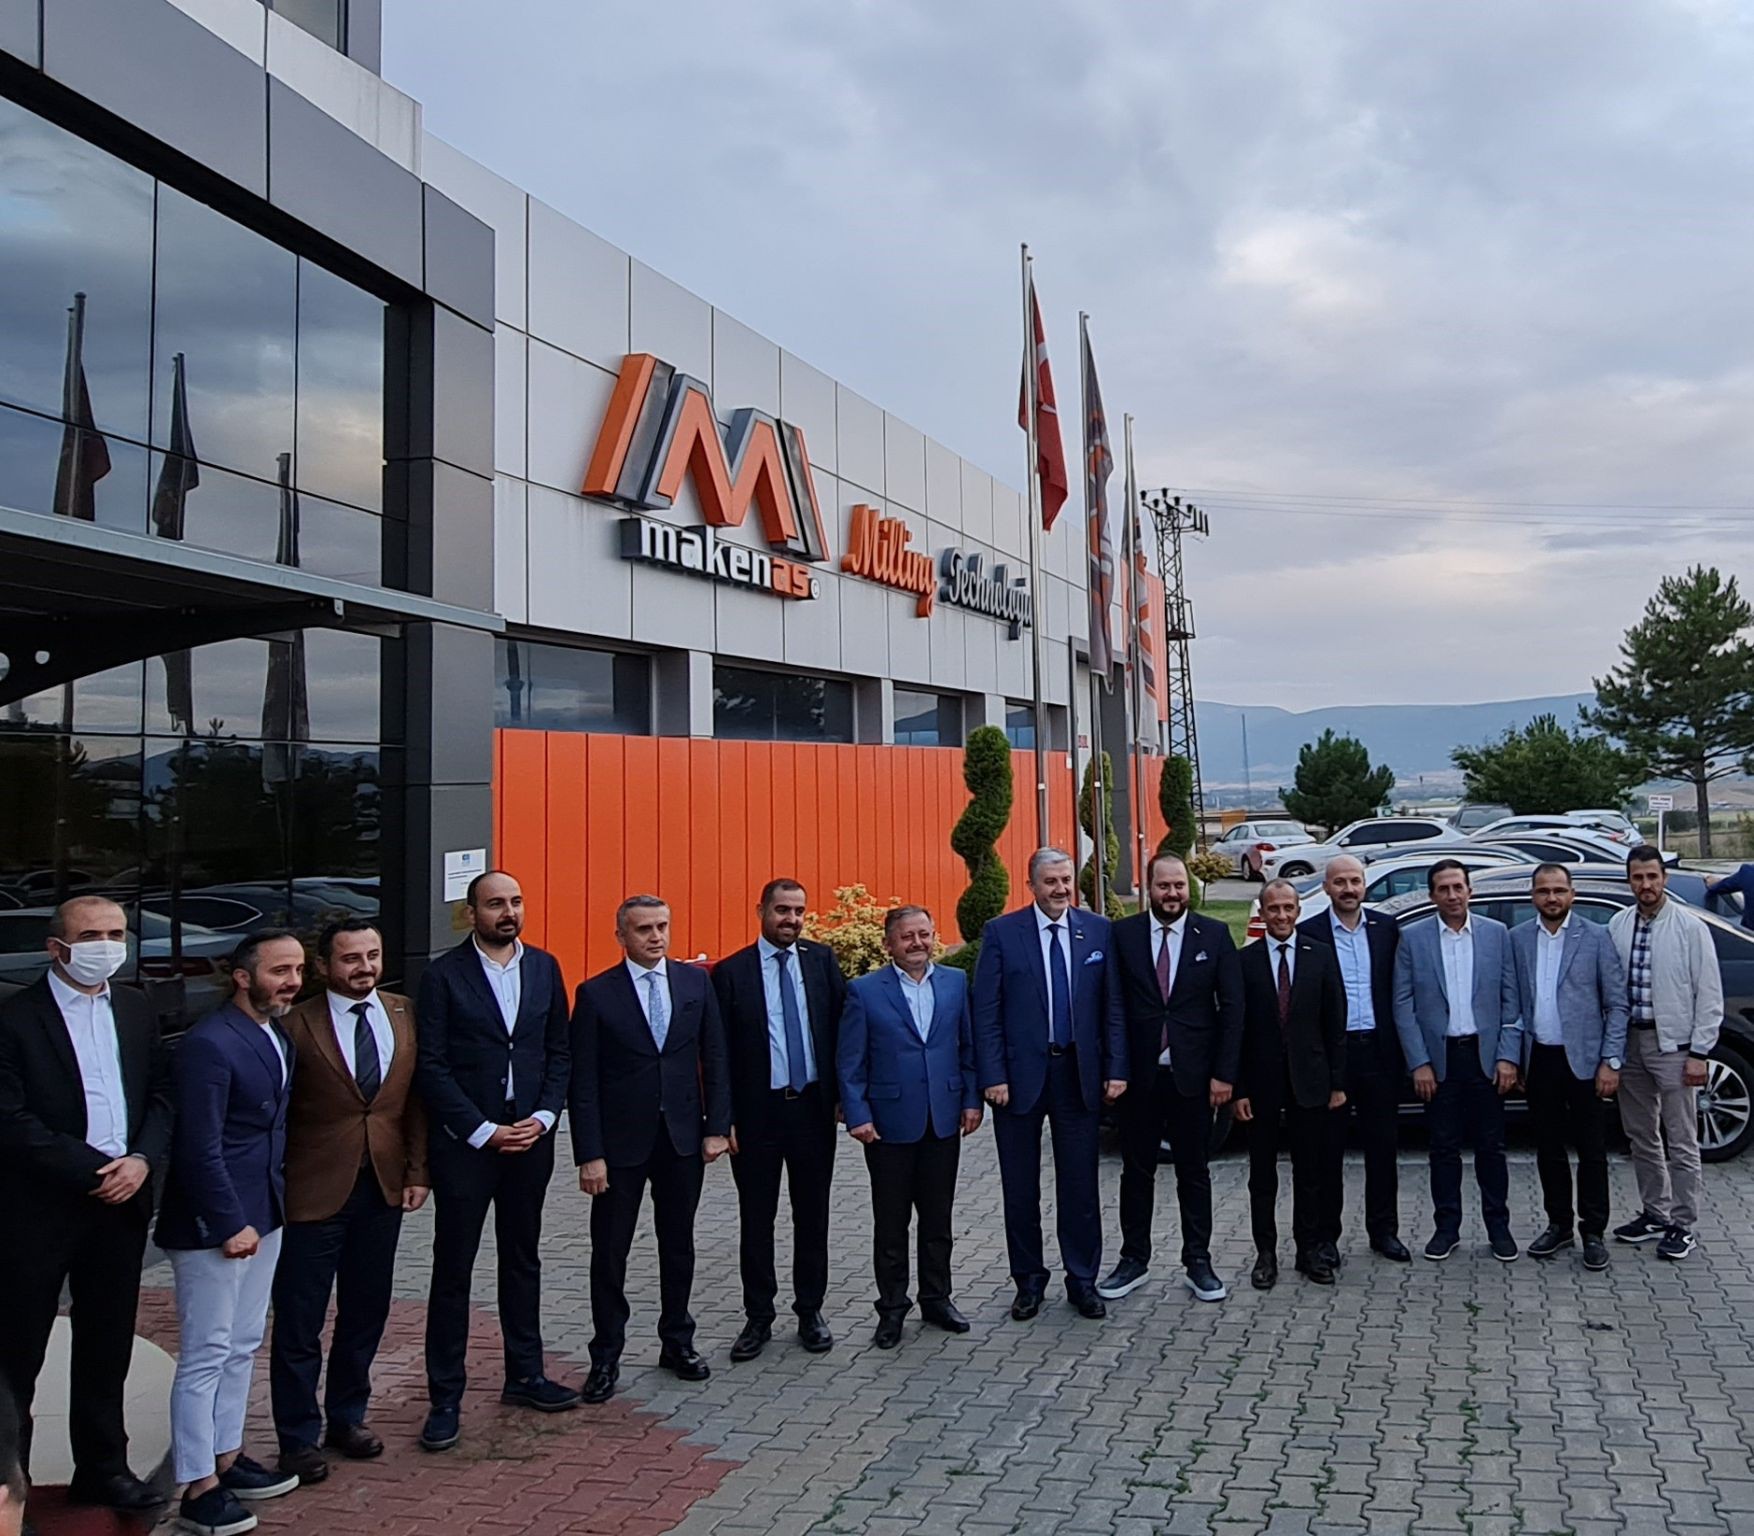 Thanks to Mr. Abdurrahman Kaan and his delegation for visiting our factory